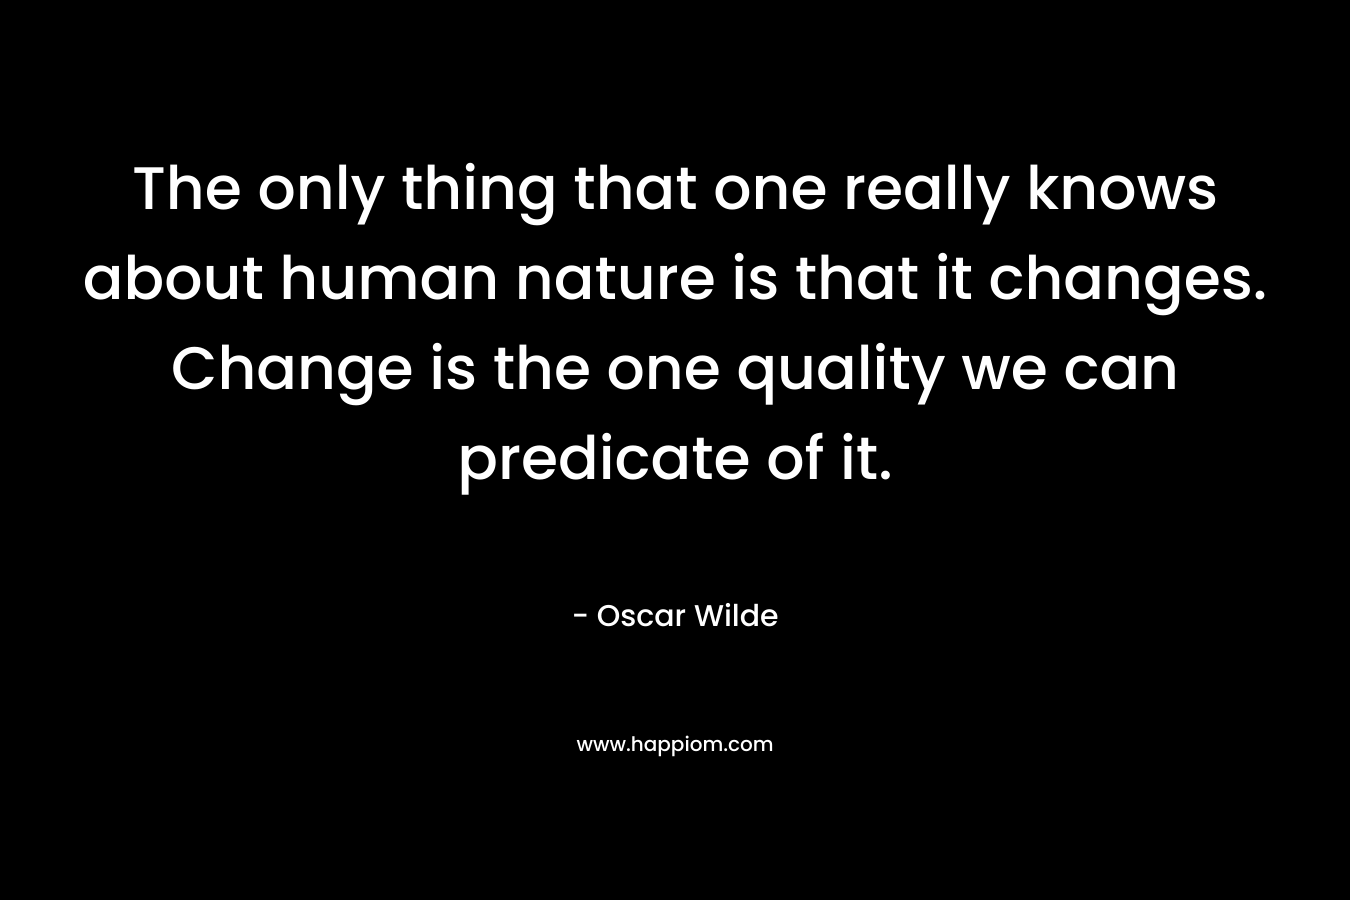 The only thing that one really knows about human nature is that it changes. Change is the one quality we can predicate of it.